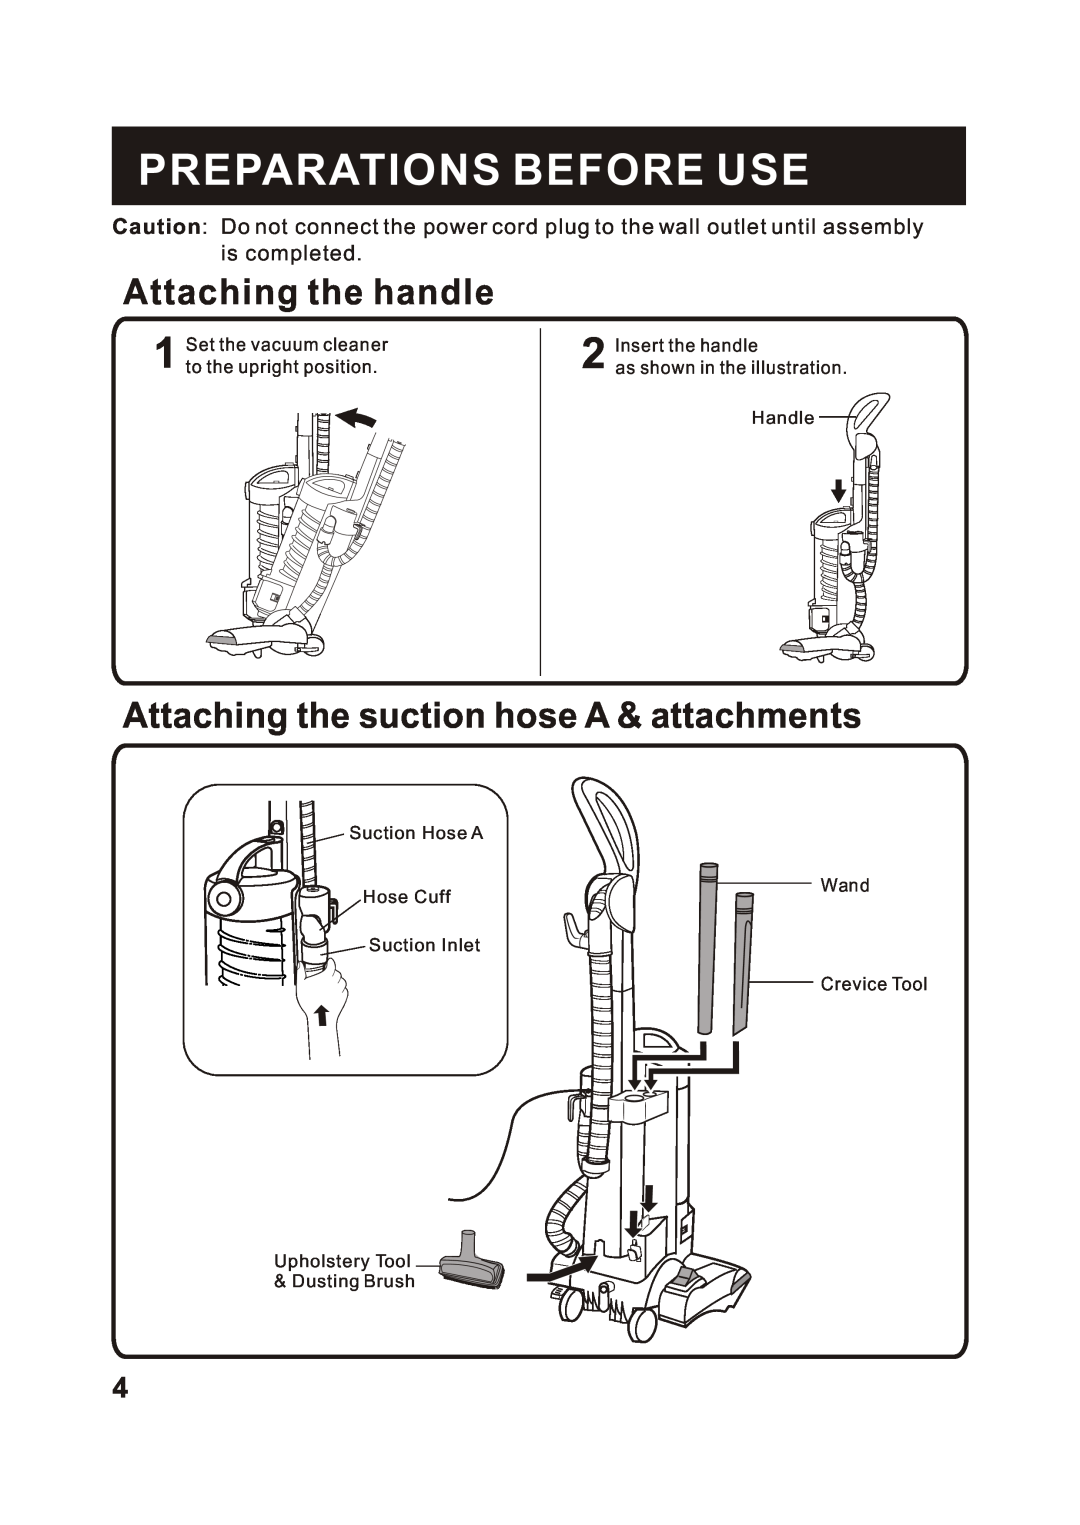 Fantom Vacuum FM742C Preparations Before Use, Attaching the handle, Attaching the suction hose A & attachments 